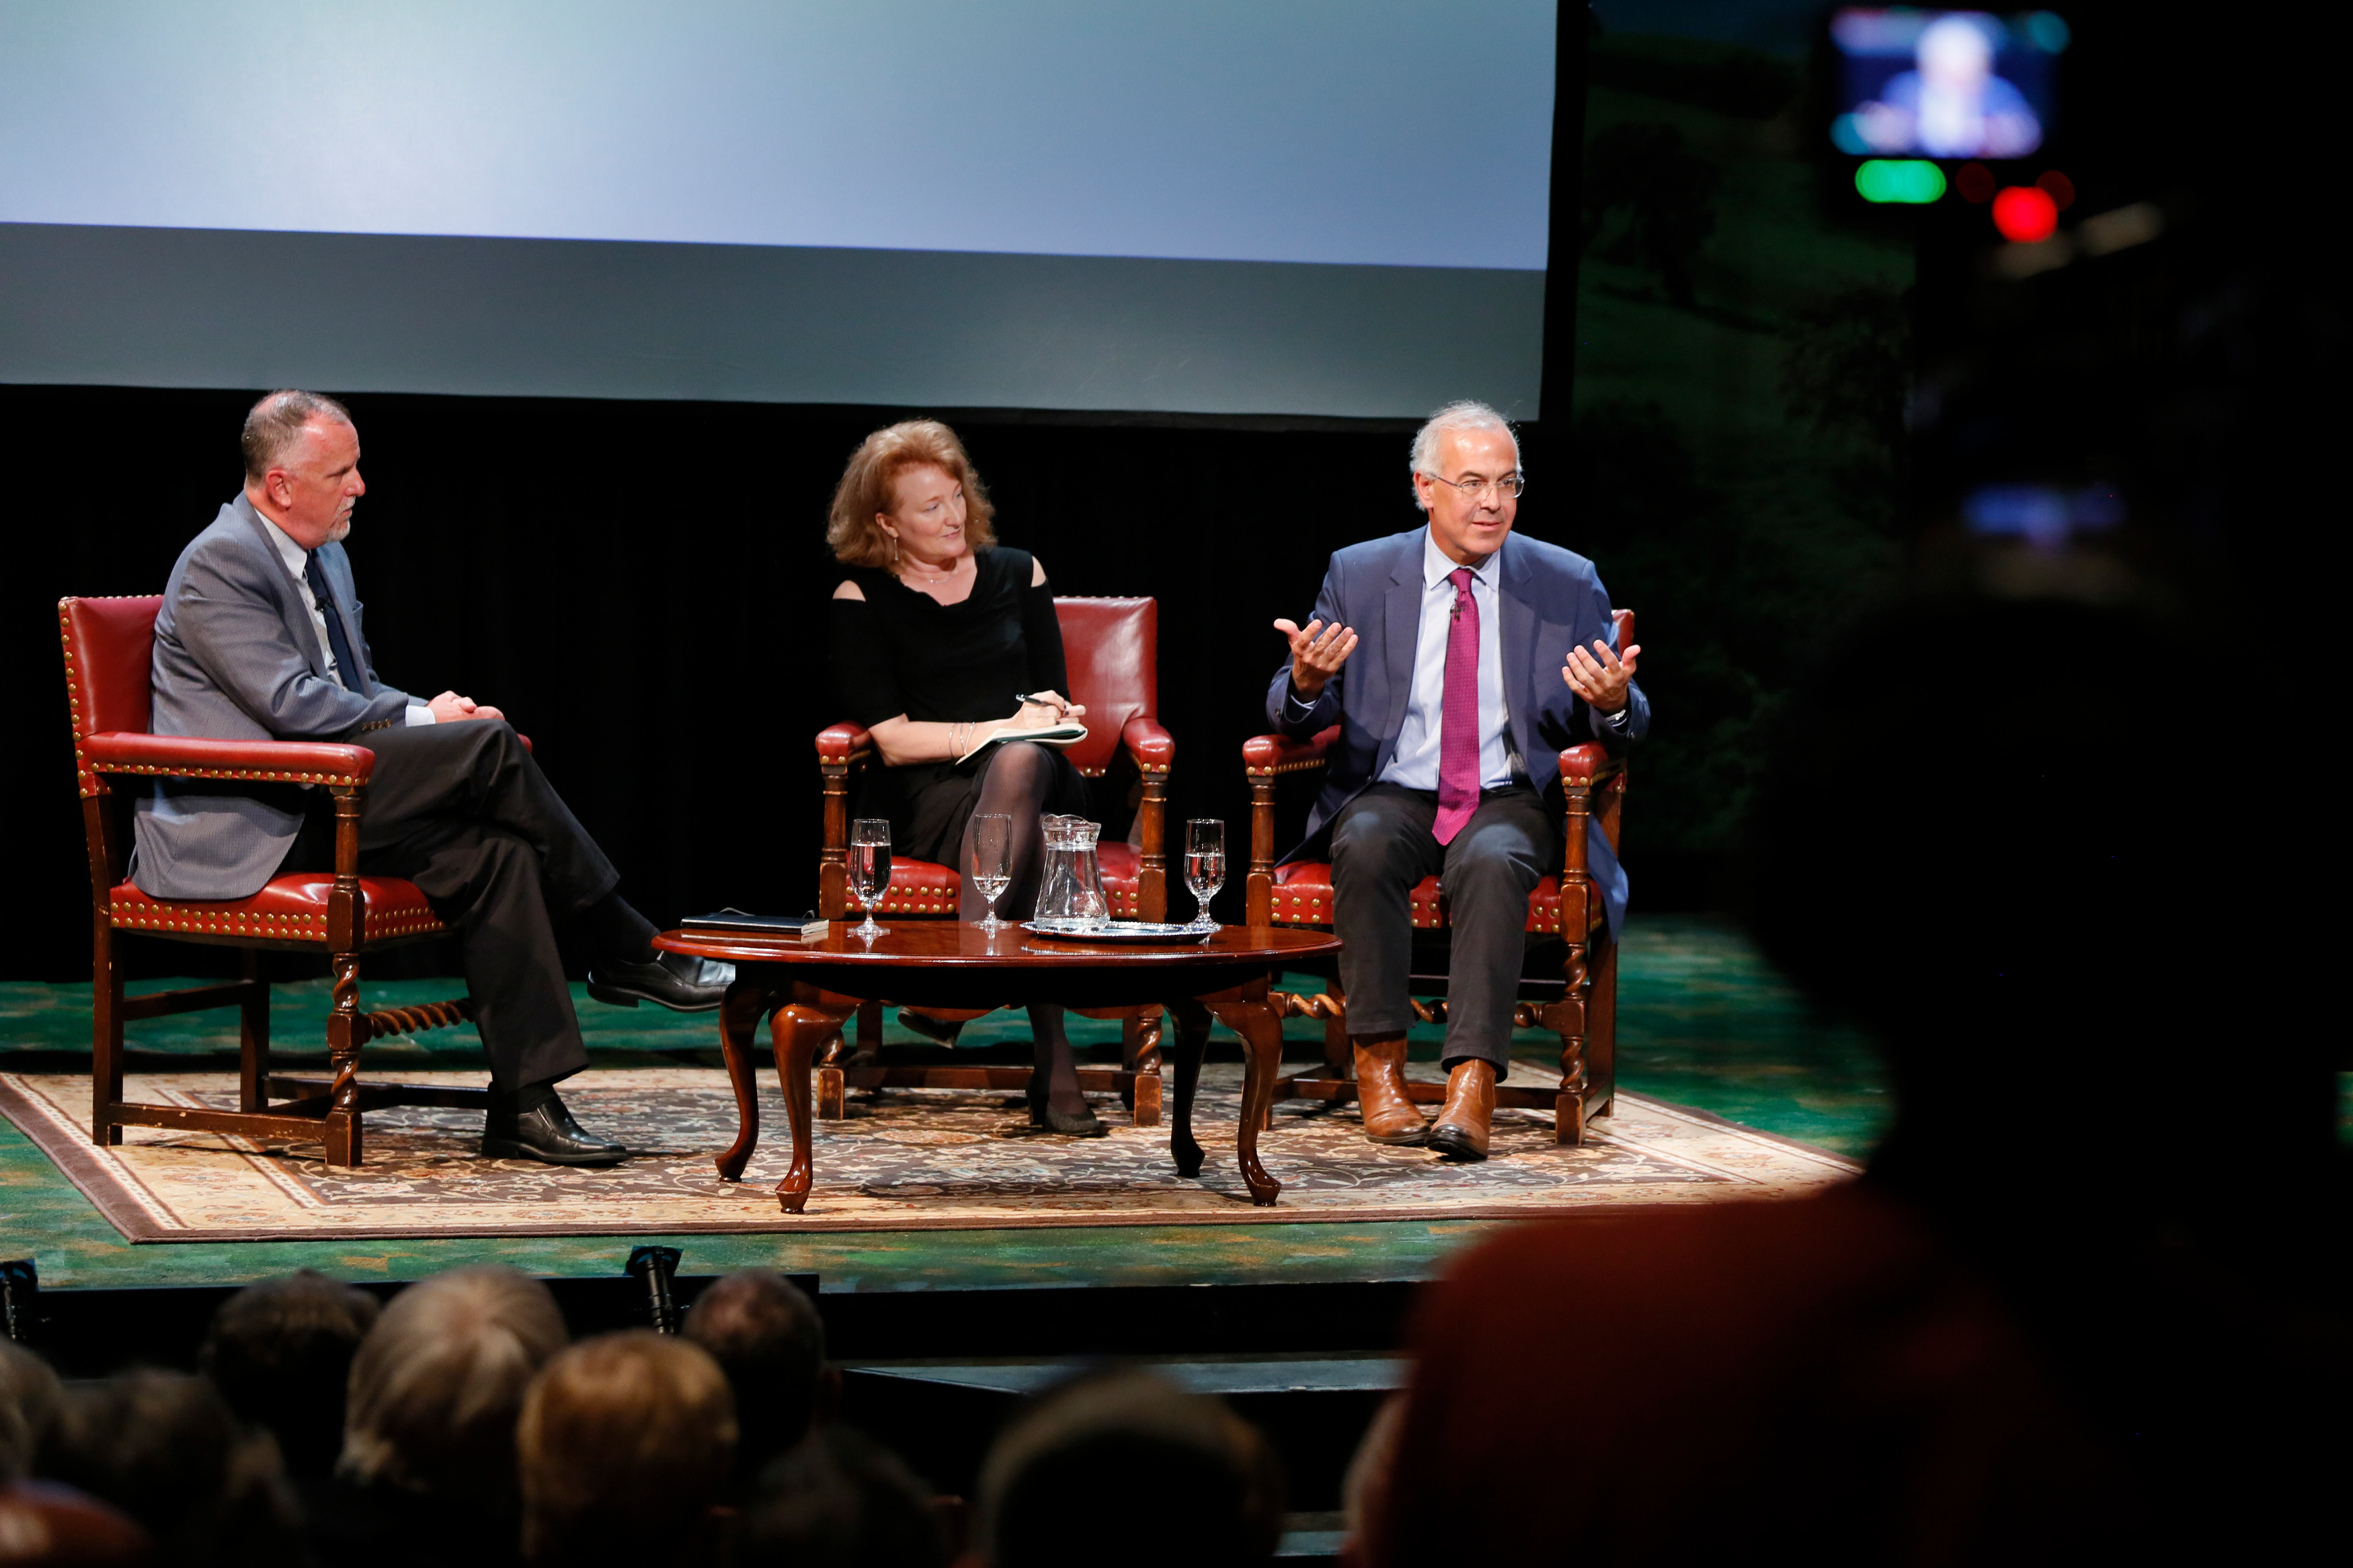 Michael Lynch, left, director of UConn's Humanities Institute, facilitates the panel discussion with Krista Tippet of NPR and David Brooks of the New York Times. (Photo by Garrett Hubbard, GH studios)